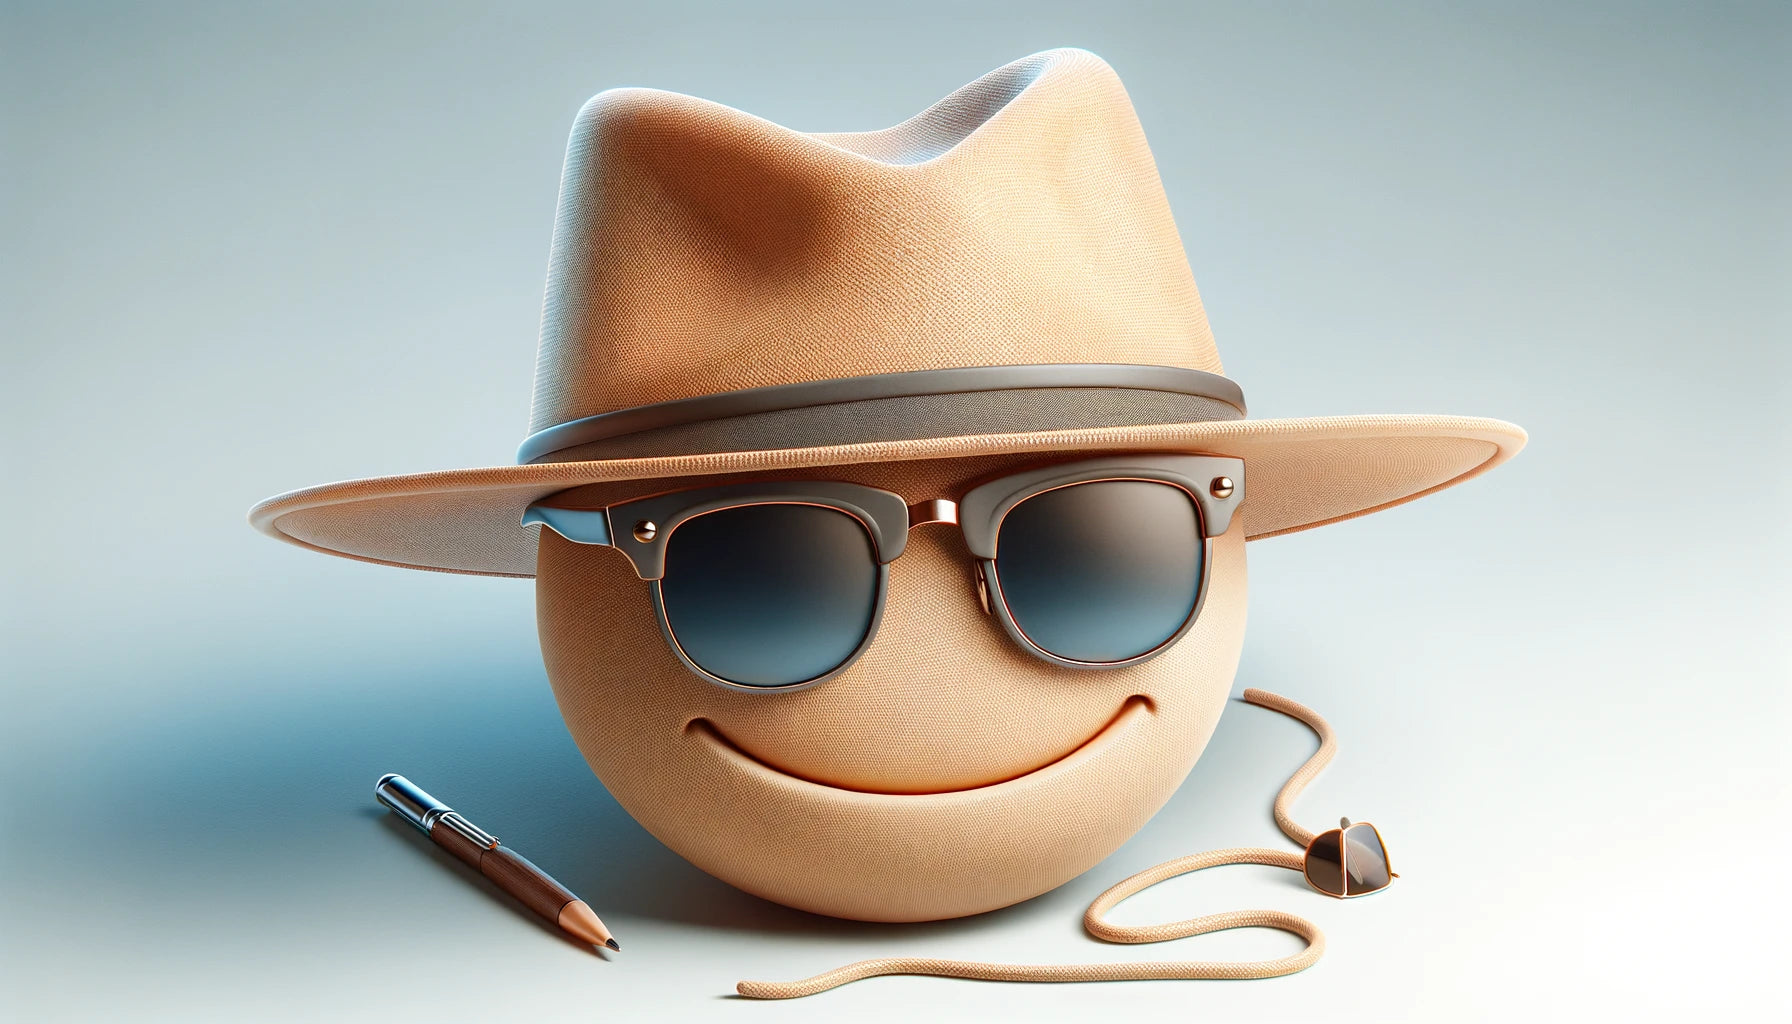 A smiling emoji face wears a fedora hat and sunglasses. A pen and a pair of headphones are placed nearby. The background is a simple light gradient.